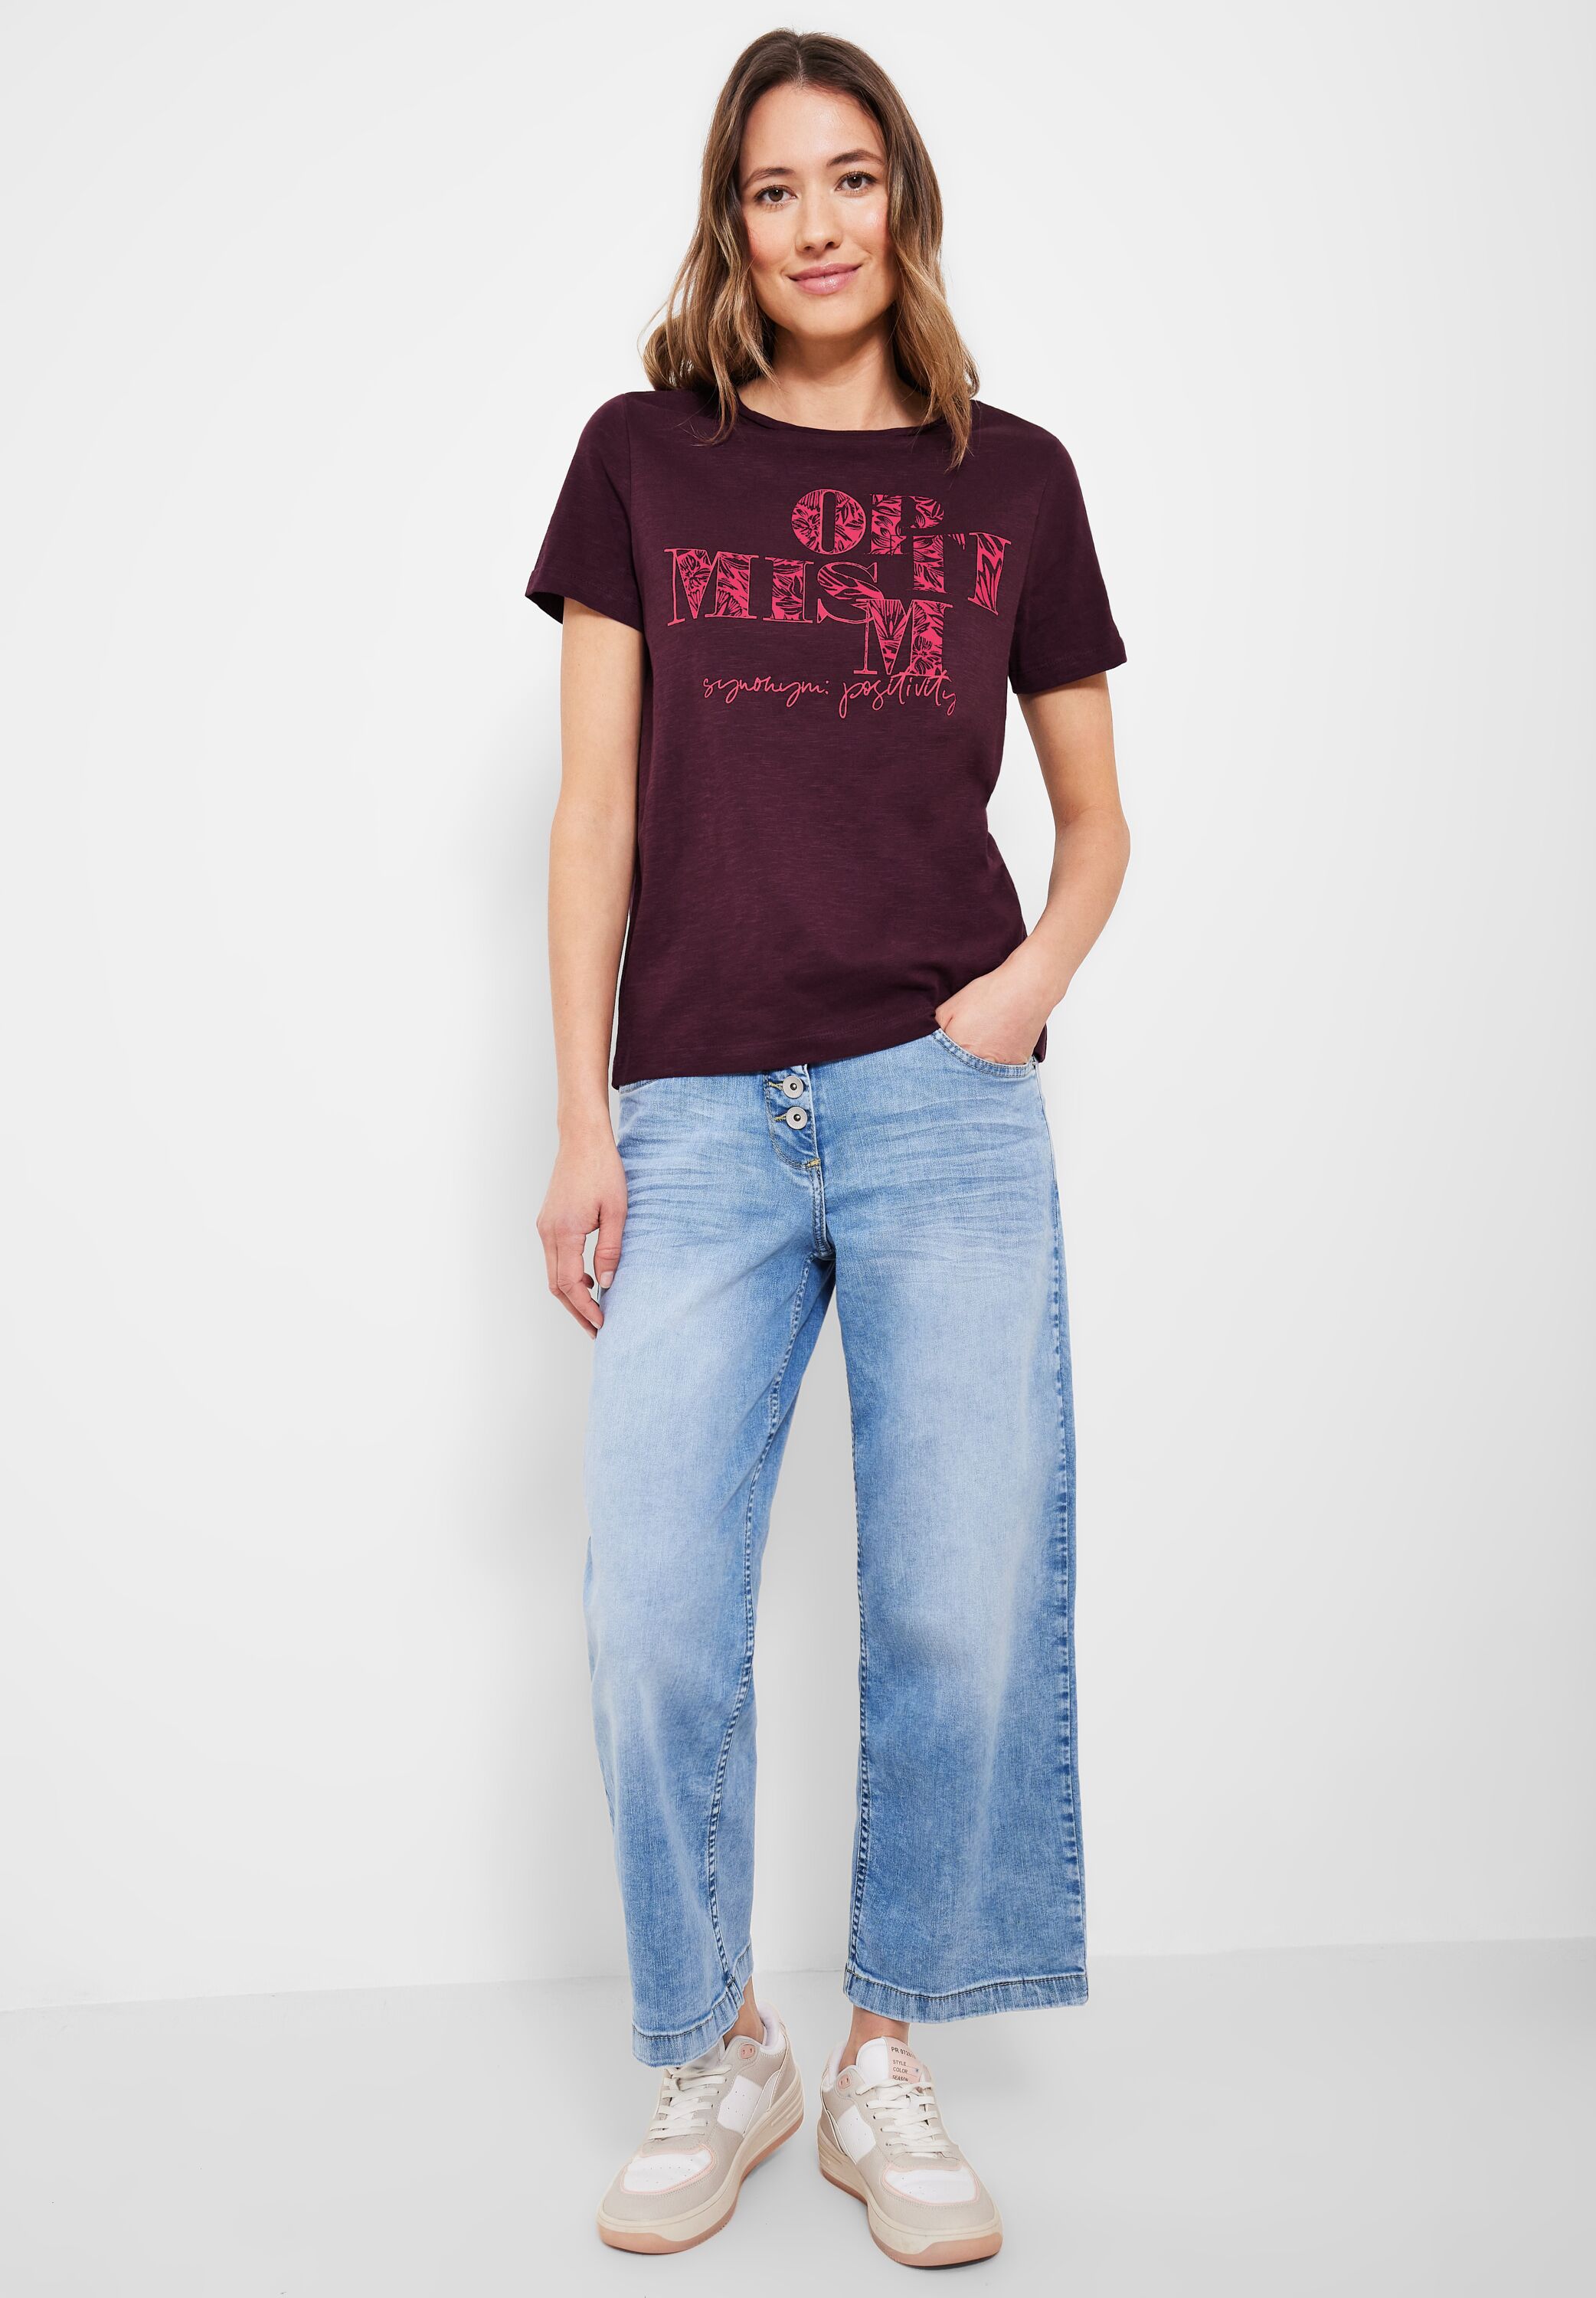 Wineberry SALE Red im CONCEPT B319637-34918 T-Shirt CECIL reduziert in - Mode